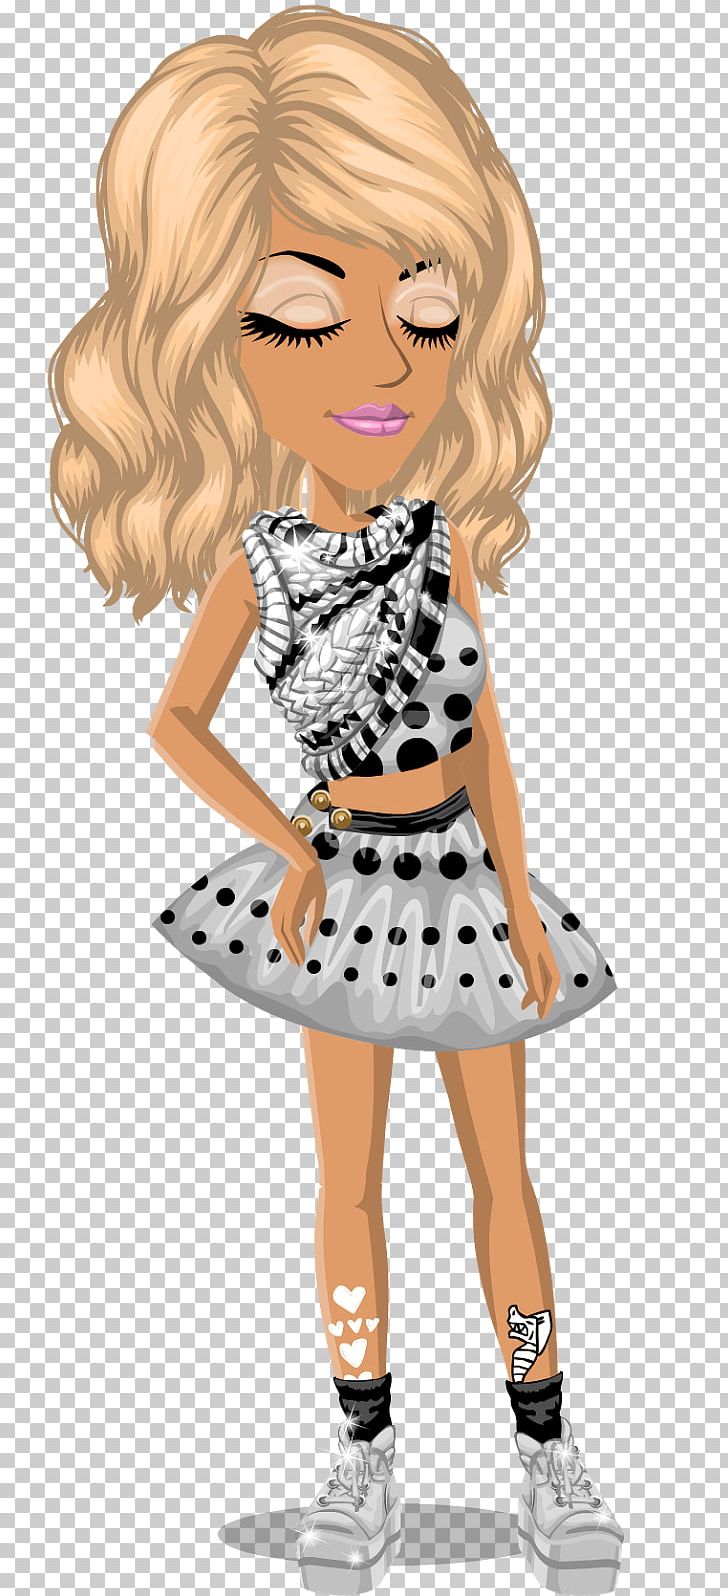 MovieStarPlanet Eye Face Android PNG, Clipart, Android, Art, Barbie, Blond, Brown Hair Free PNG Download